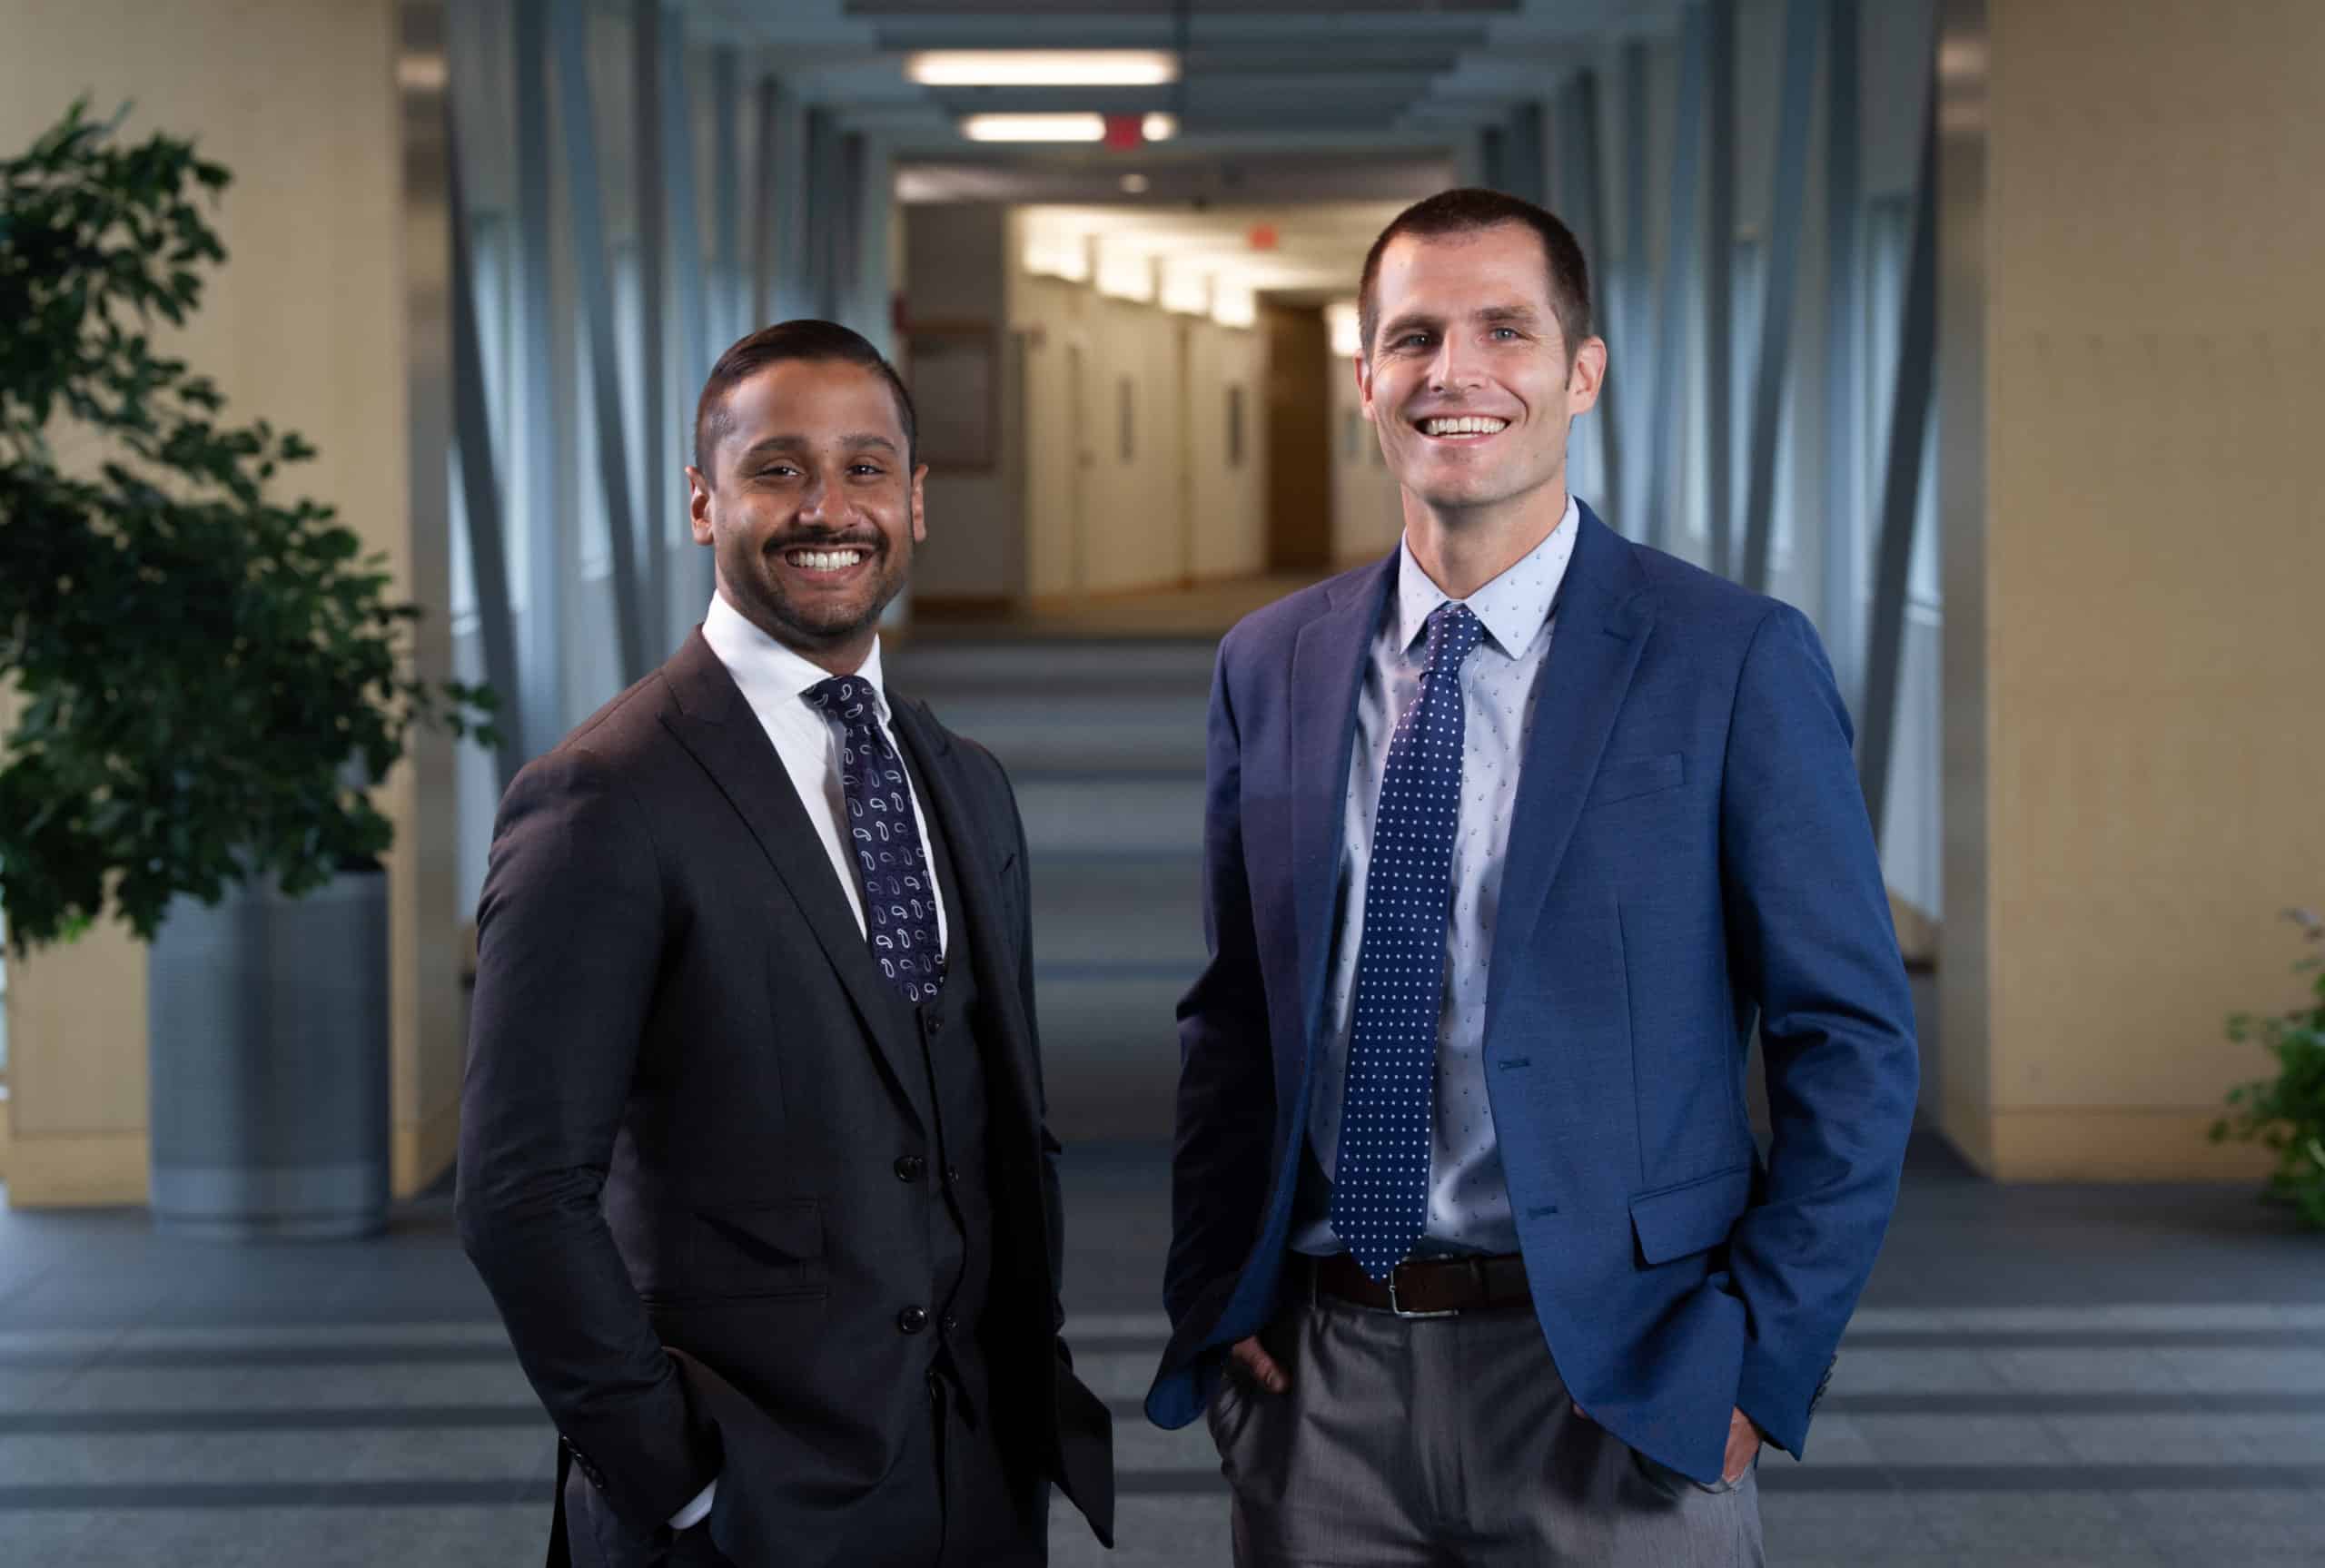 Featured image for “AHVI Welcomes Dr. Dixson & Dr. Ghosh”